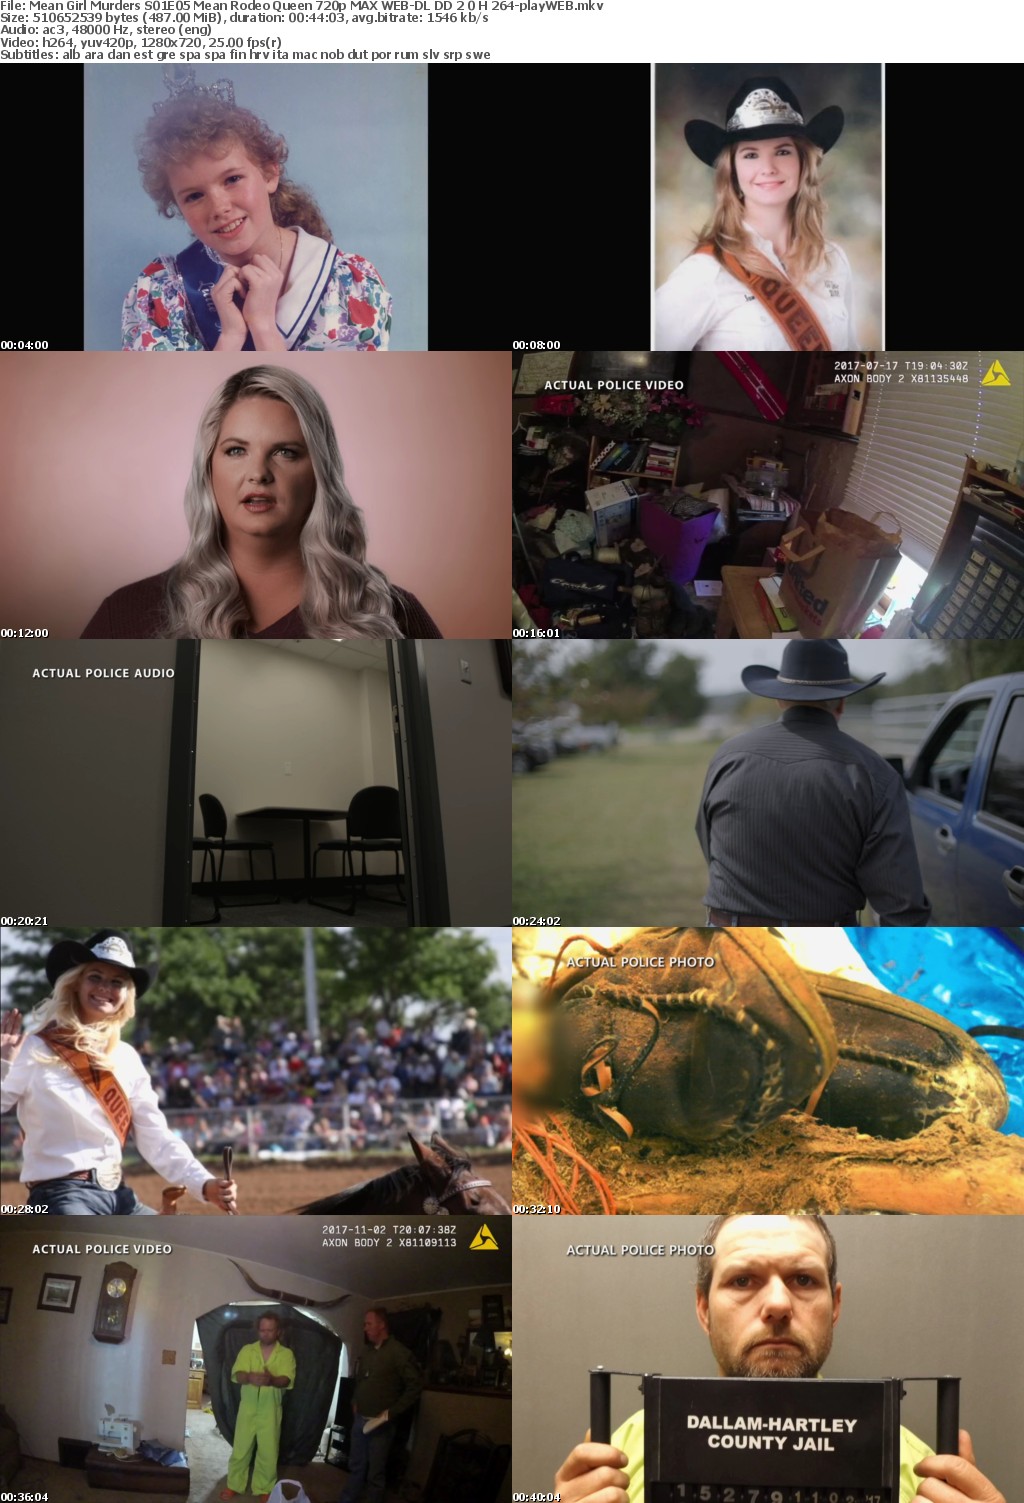 Mean Girl Murders S01E05 Mean Rodeo Queen 720p MAX WEB-DL DD 2 0 H 264-playWEB